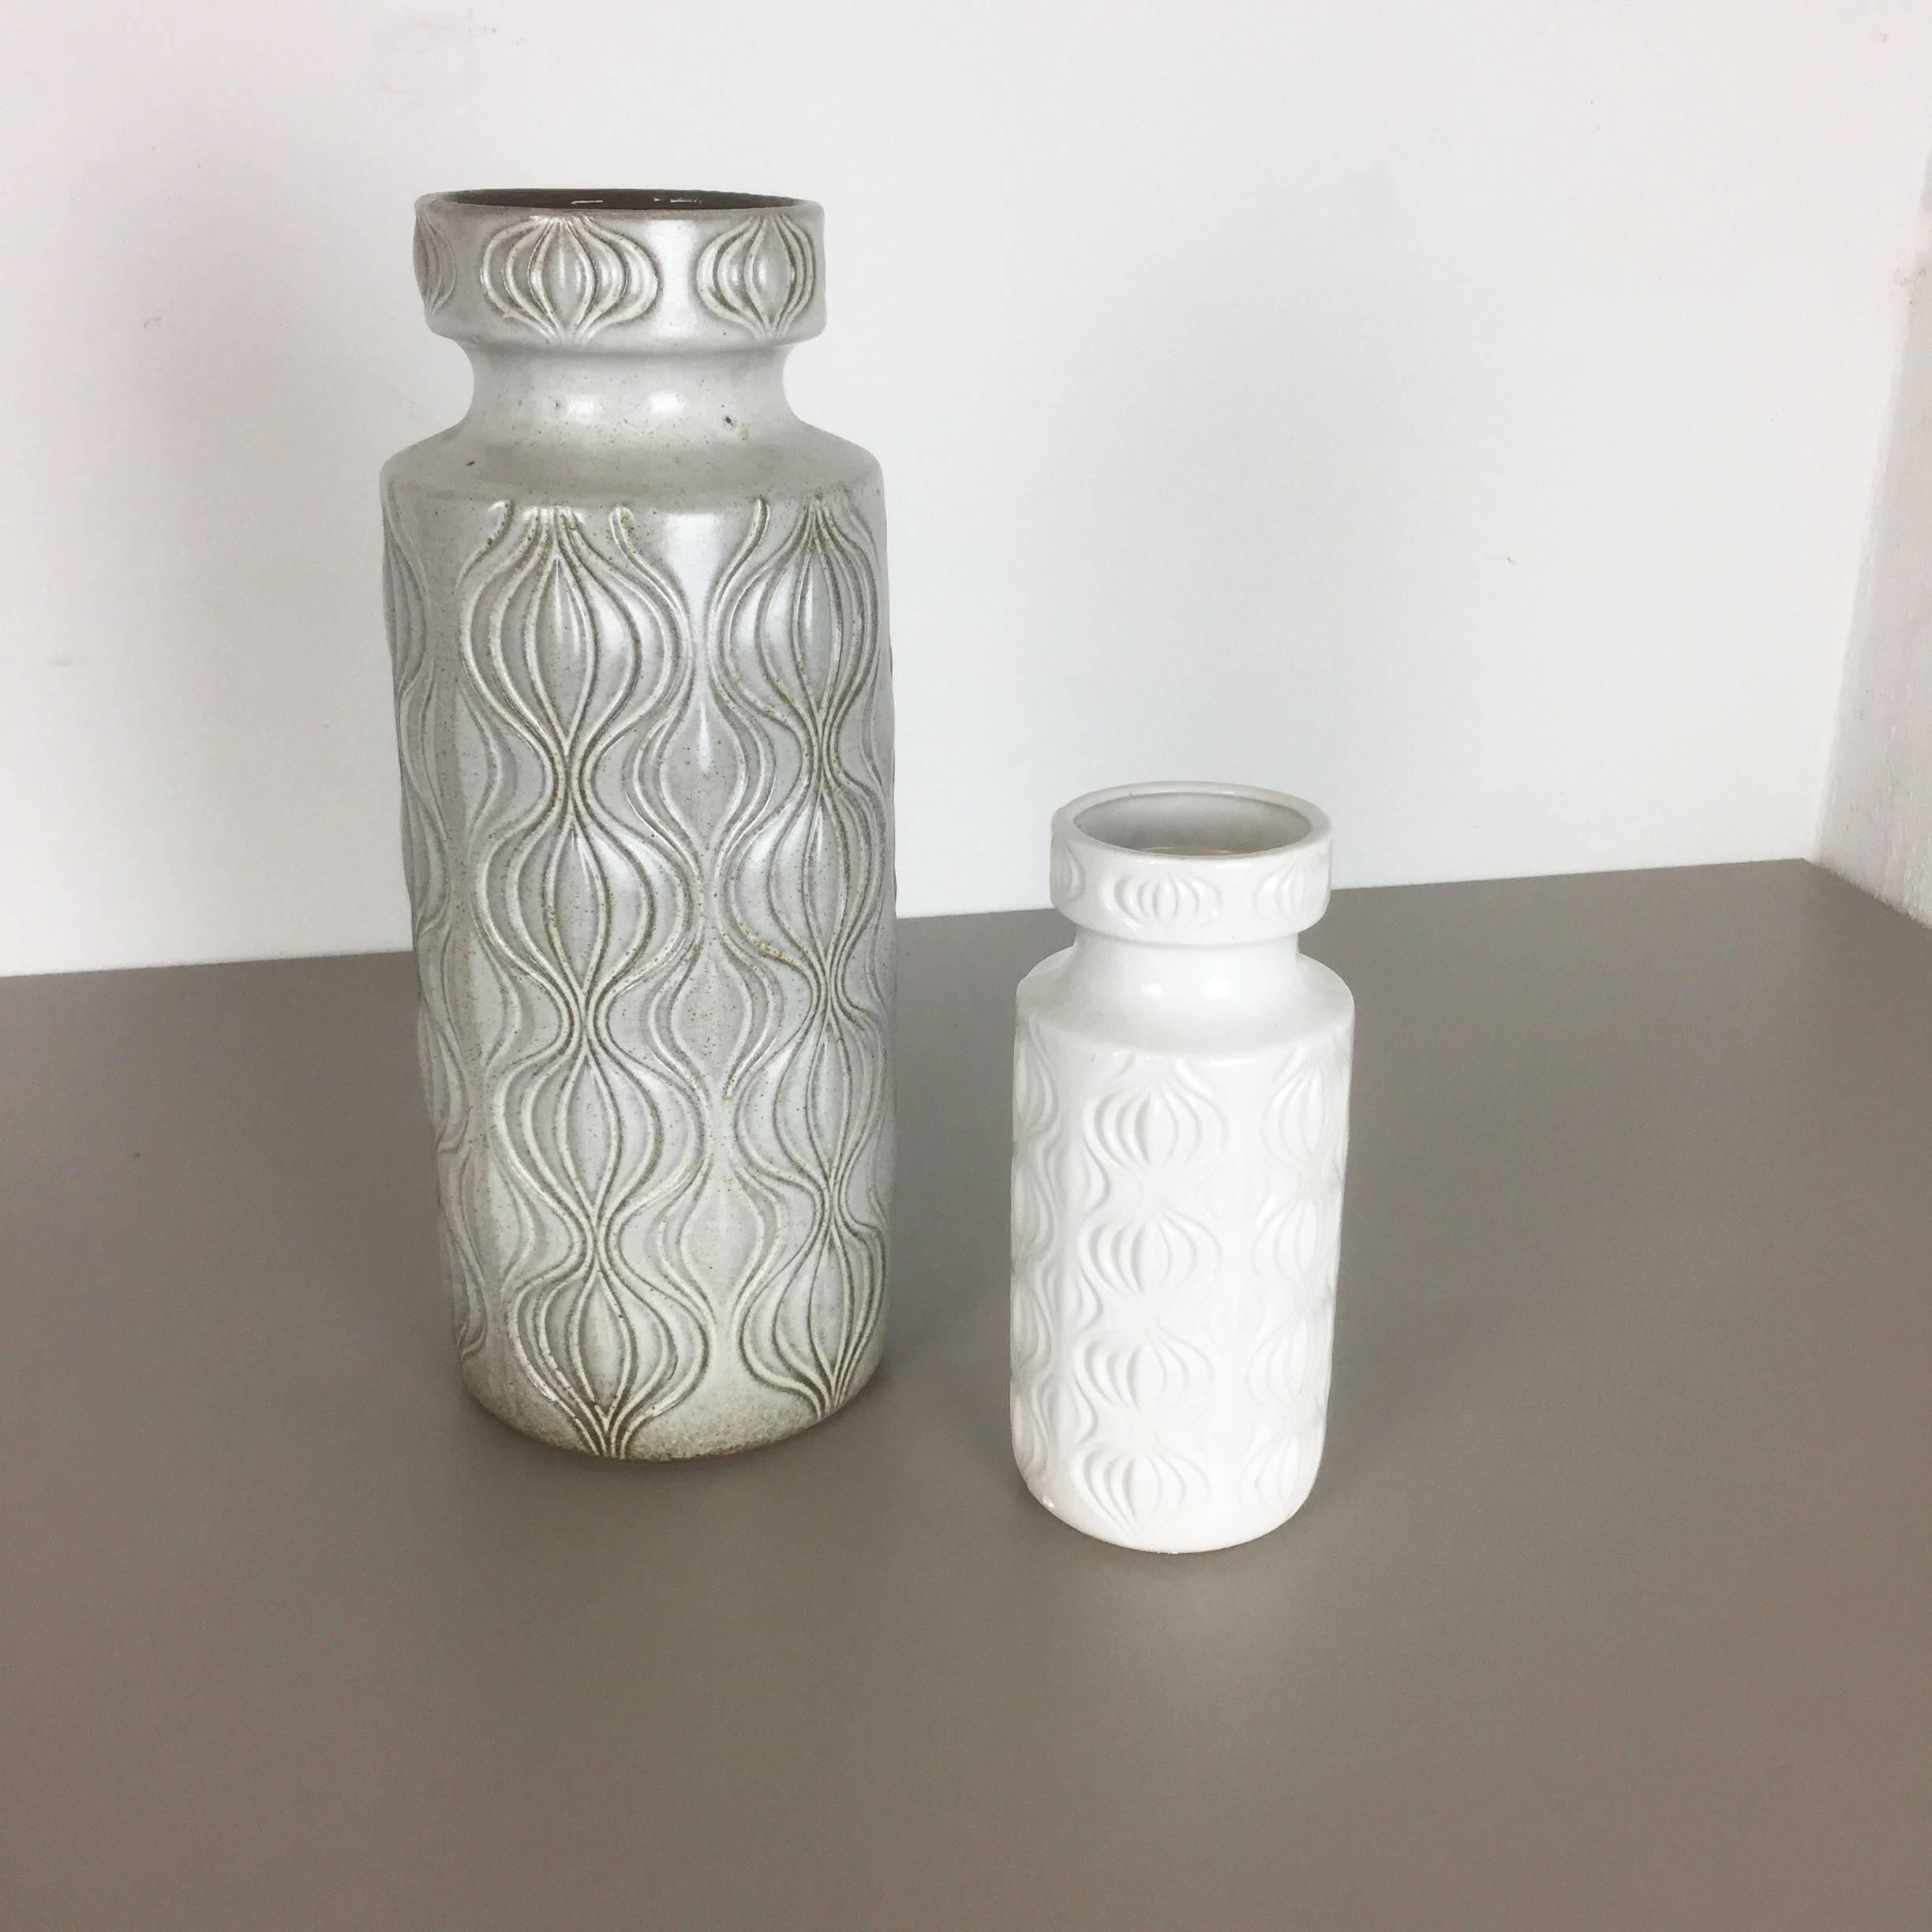 Article:

Set of two fat lava art vases

Model: Onion

Producer:

Scheurich, Germany



Decade:

1970s


Description:

These original vintage vases was produced in the 1970s in Germany. It is made of ceramic pottery in fat lava